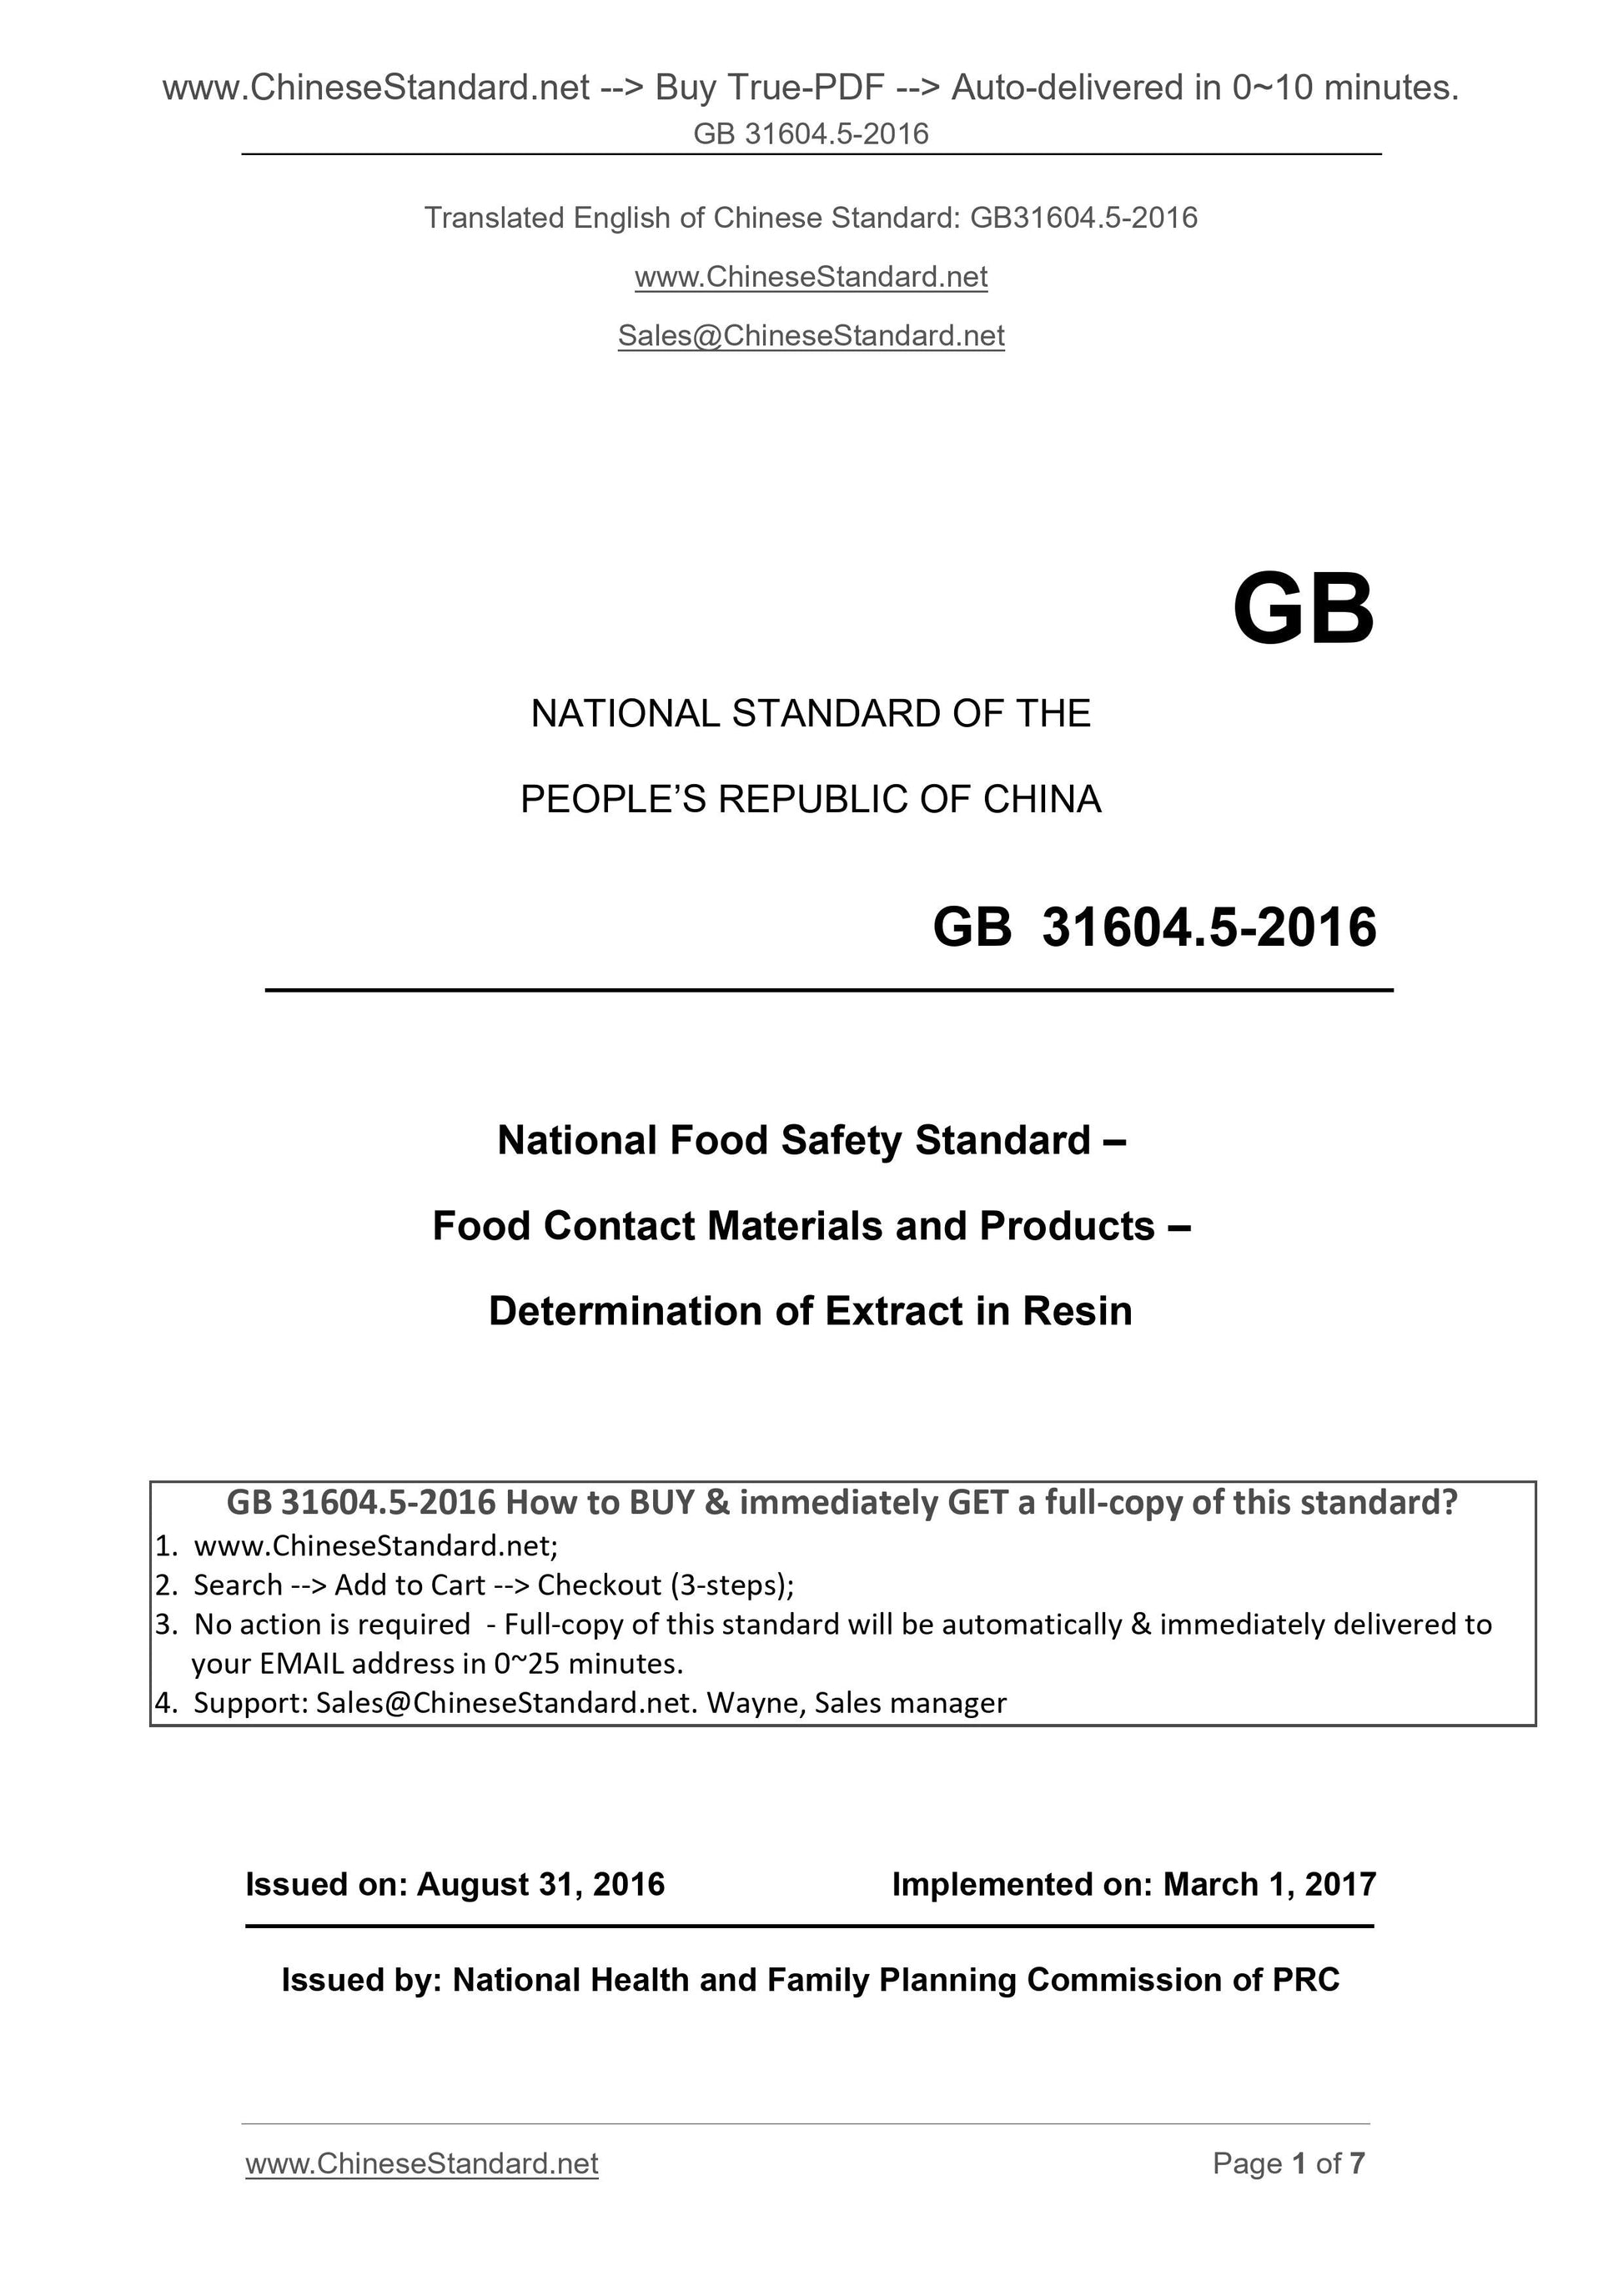 GB 31604.5-2016 Page 1